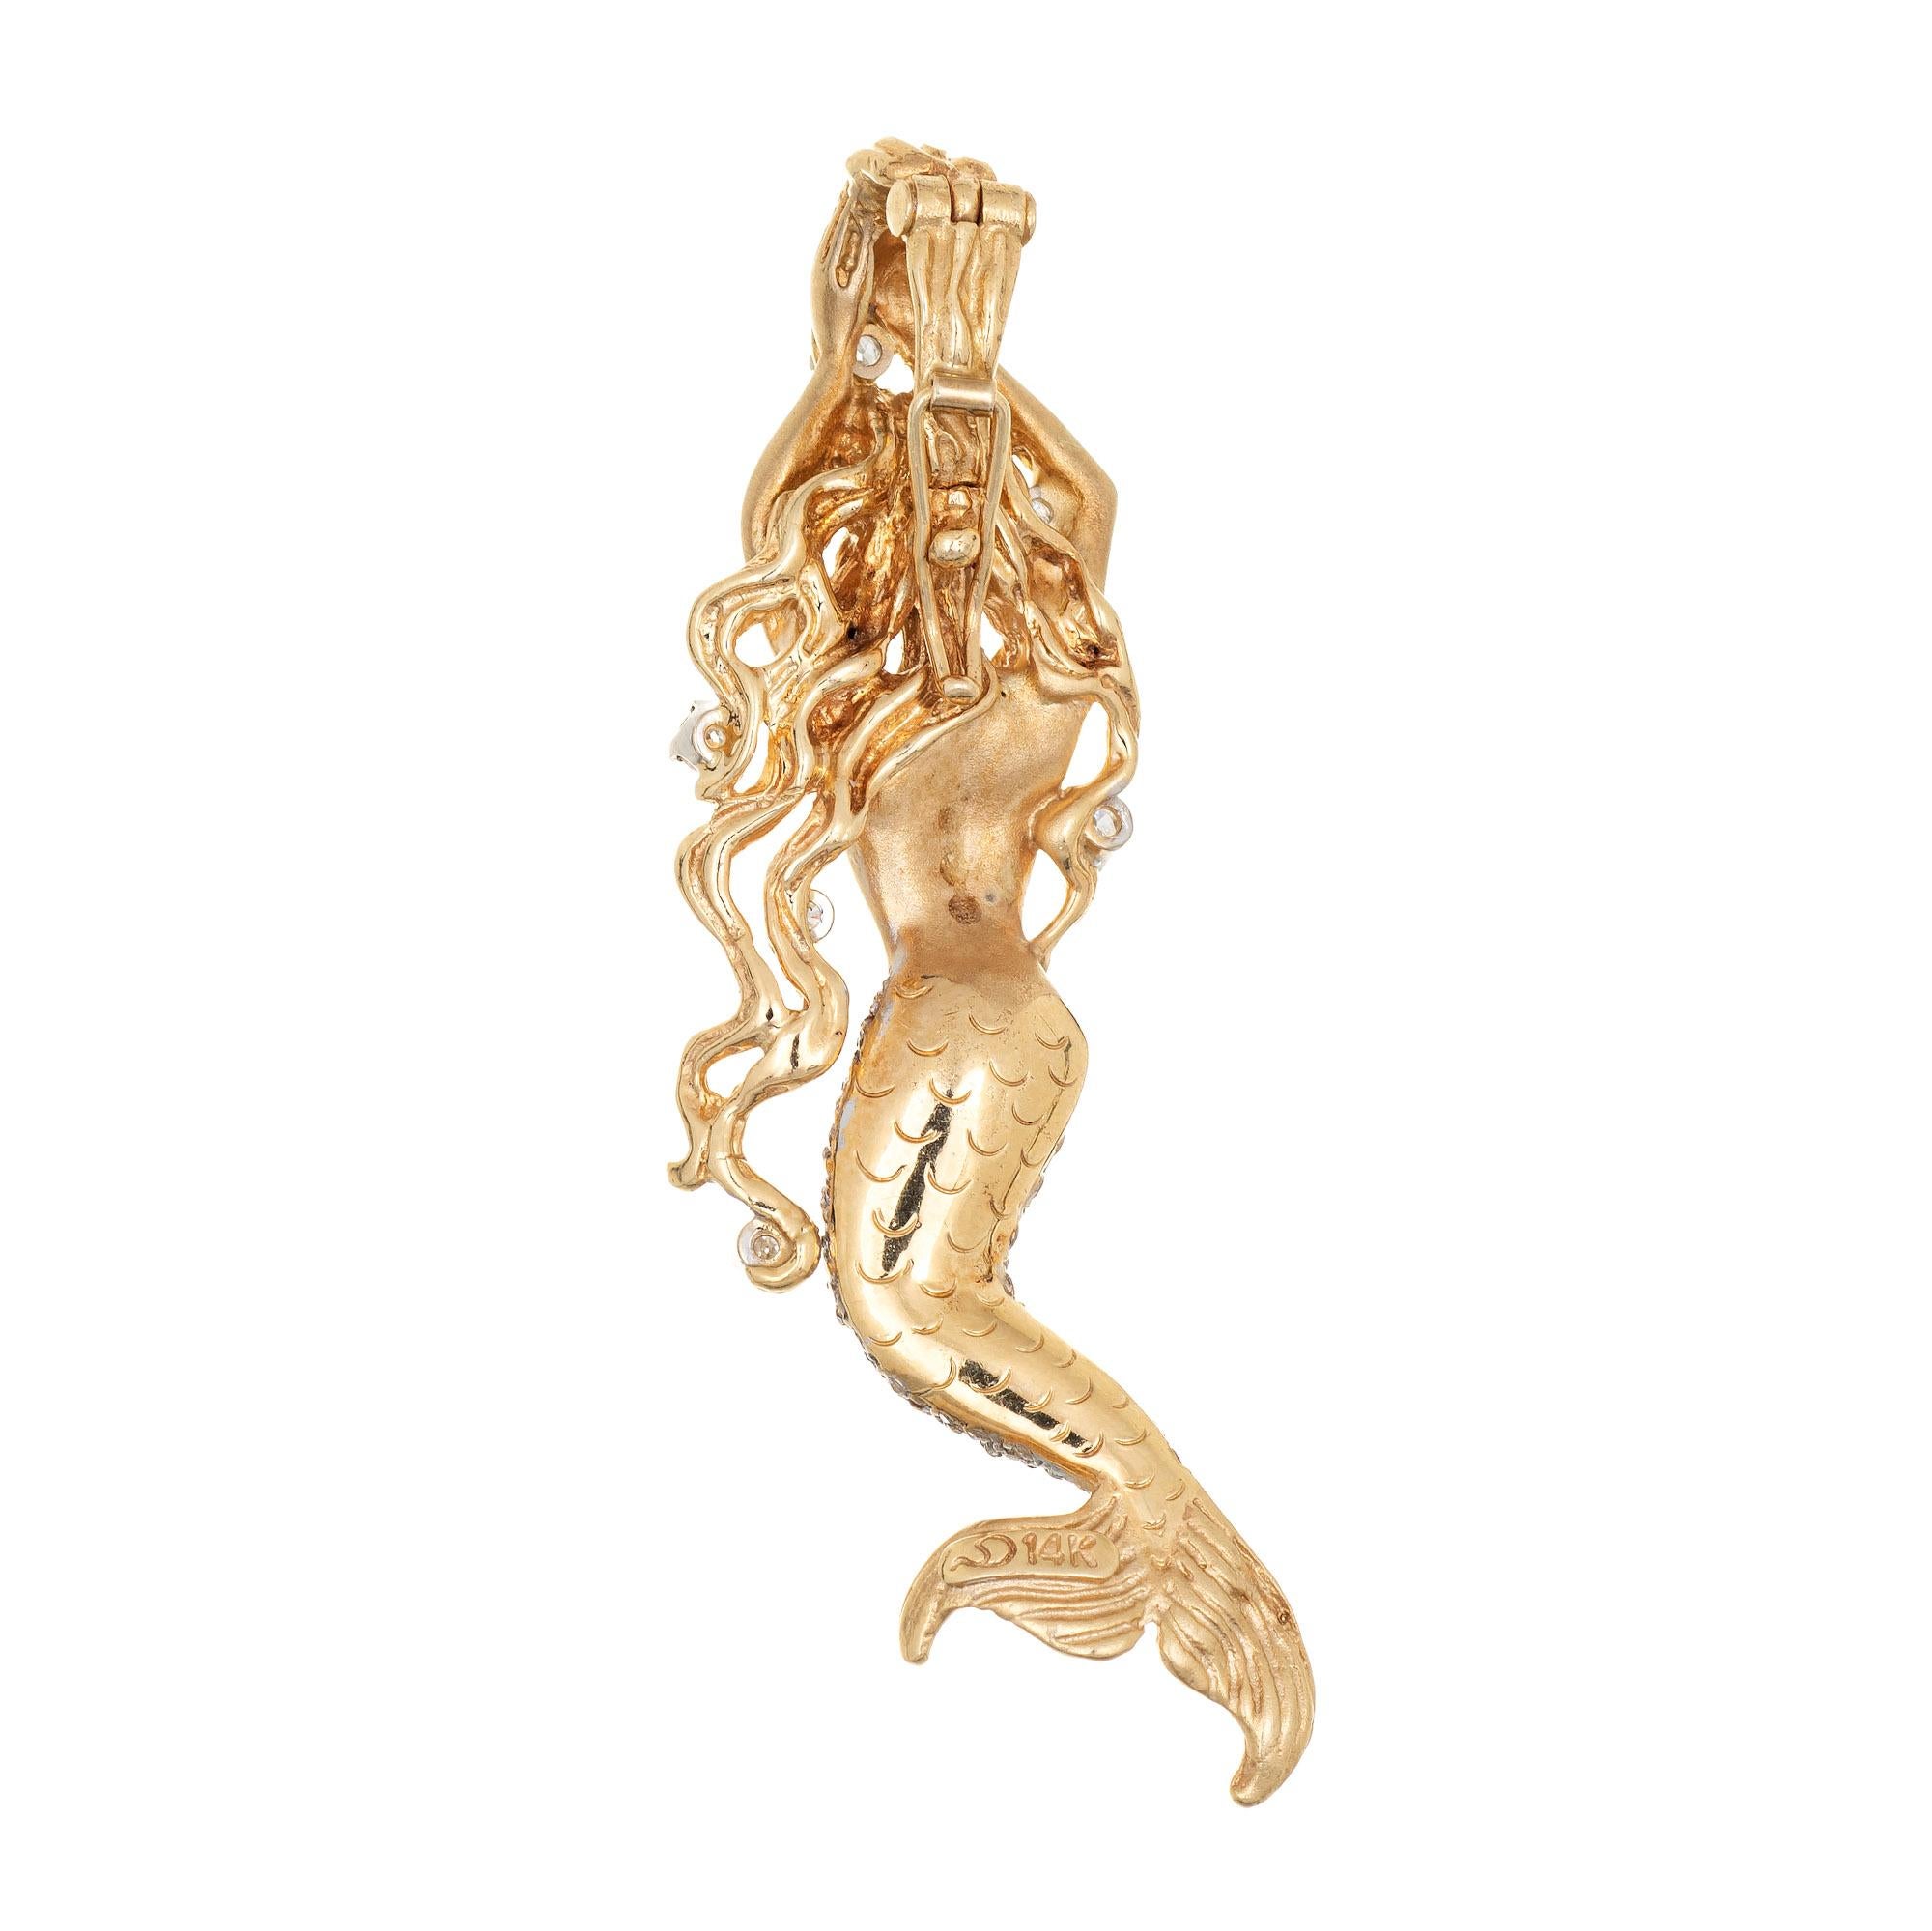 Finely detailed Mermaid pendant crafted in 14k yellow gold.  

Diamonds total an estimated 0.50 carats (estimated at H-I color and VS2-SI2 clarity).

A symbol of life and fertility the mermaid is beautifully detailed, set with shimmering diamonds.